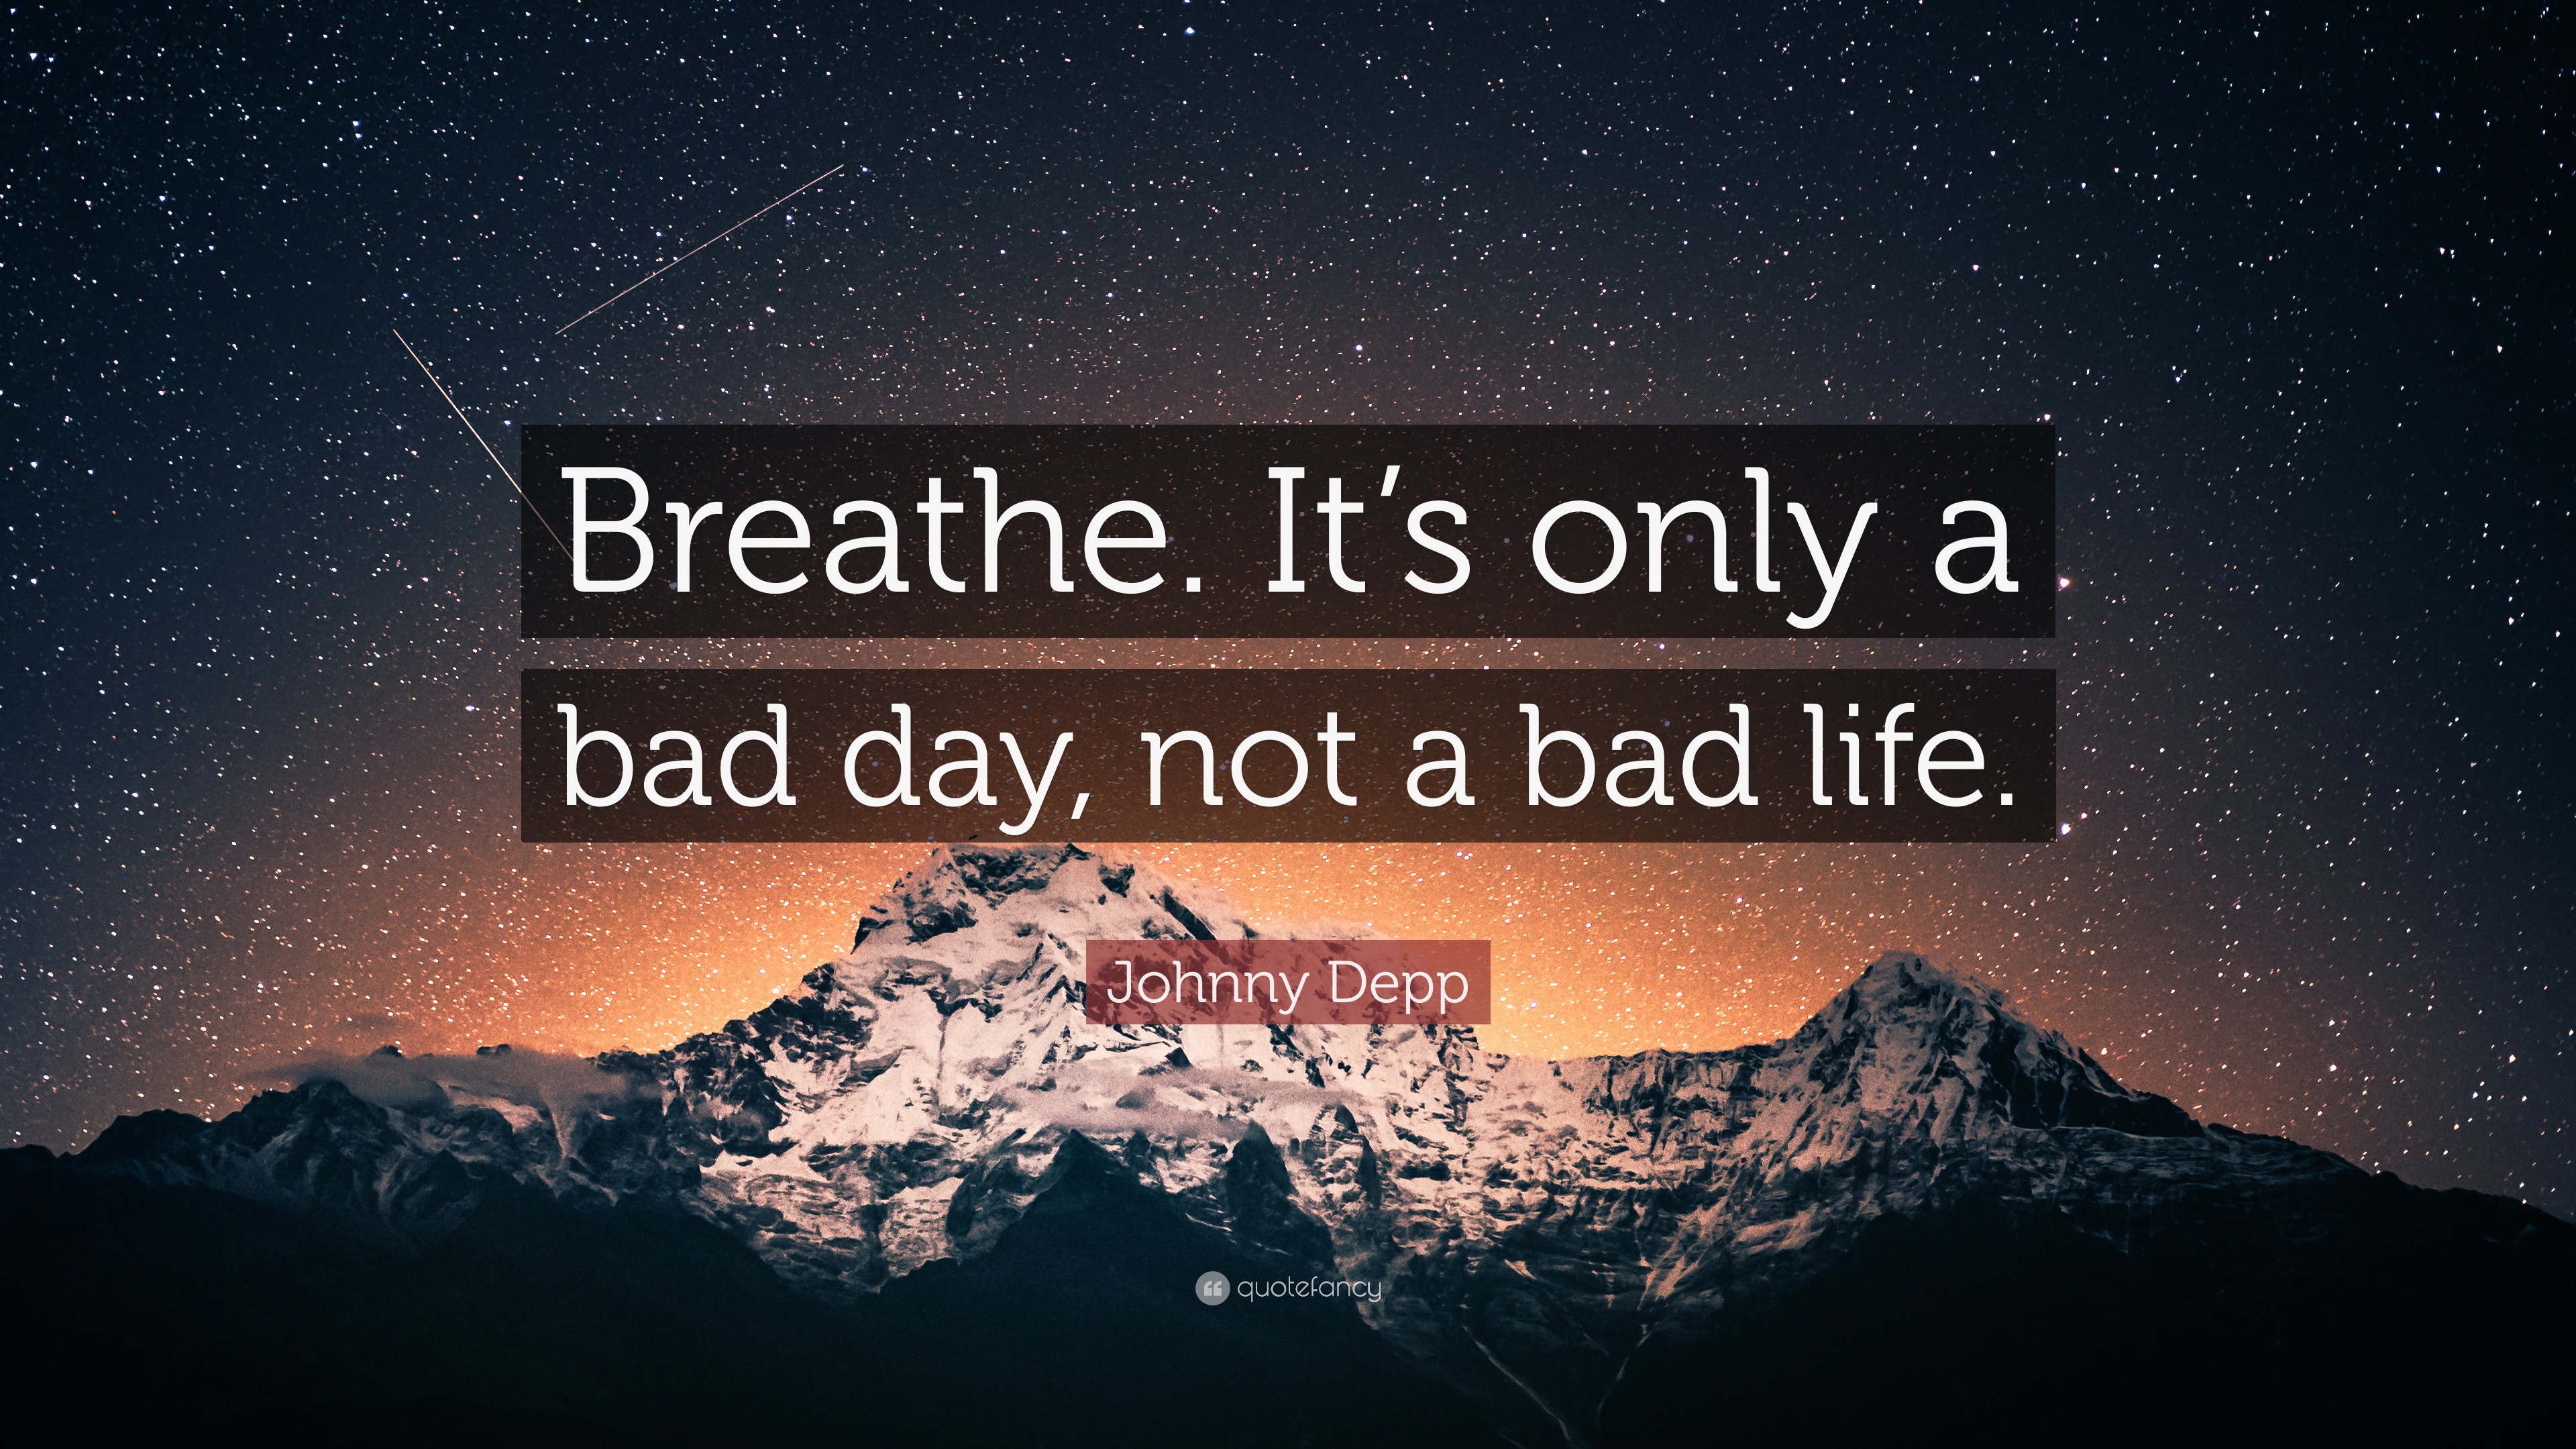 Johnny Depp Quote: “Breathe. It's only a bad day, not a bad life.”